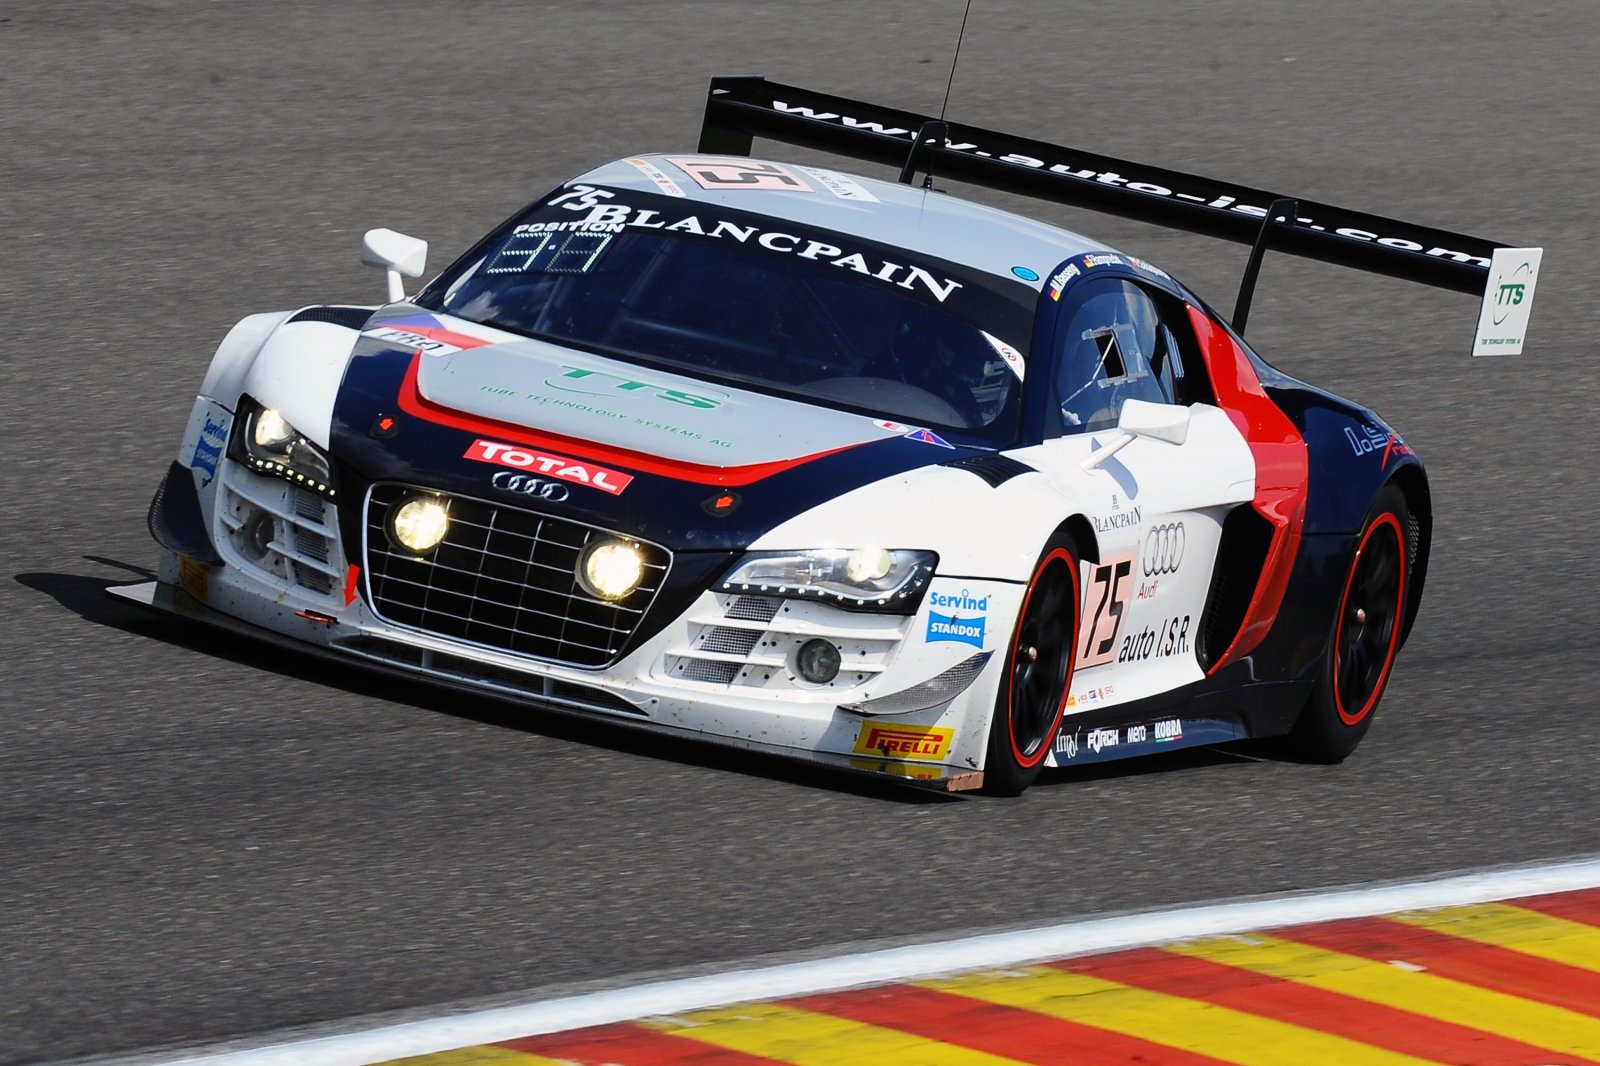 Full Blancpain GT Series programme for I.S.R. Racing in 2015